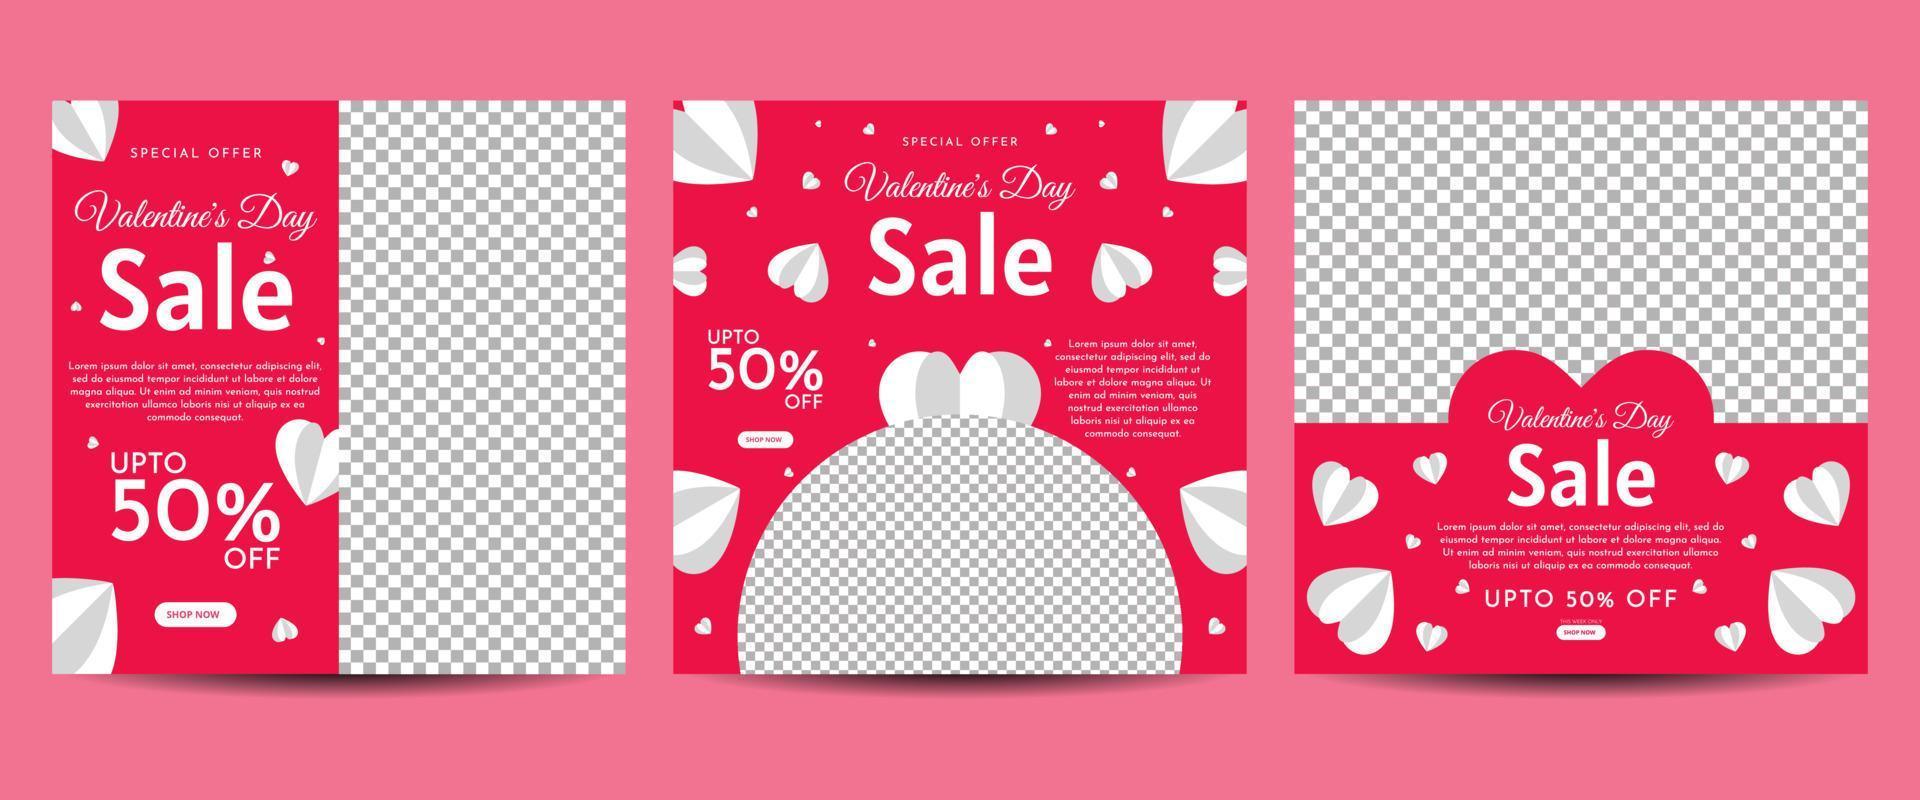 Valentine's day social media post template for banner, poster, greeting card, promotional discount sale, etc vector